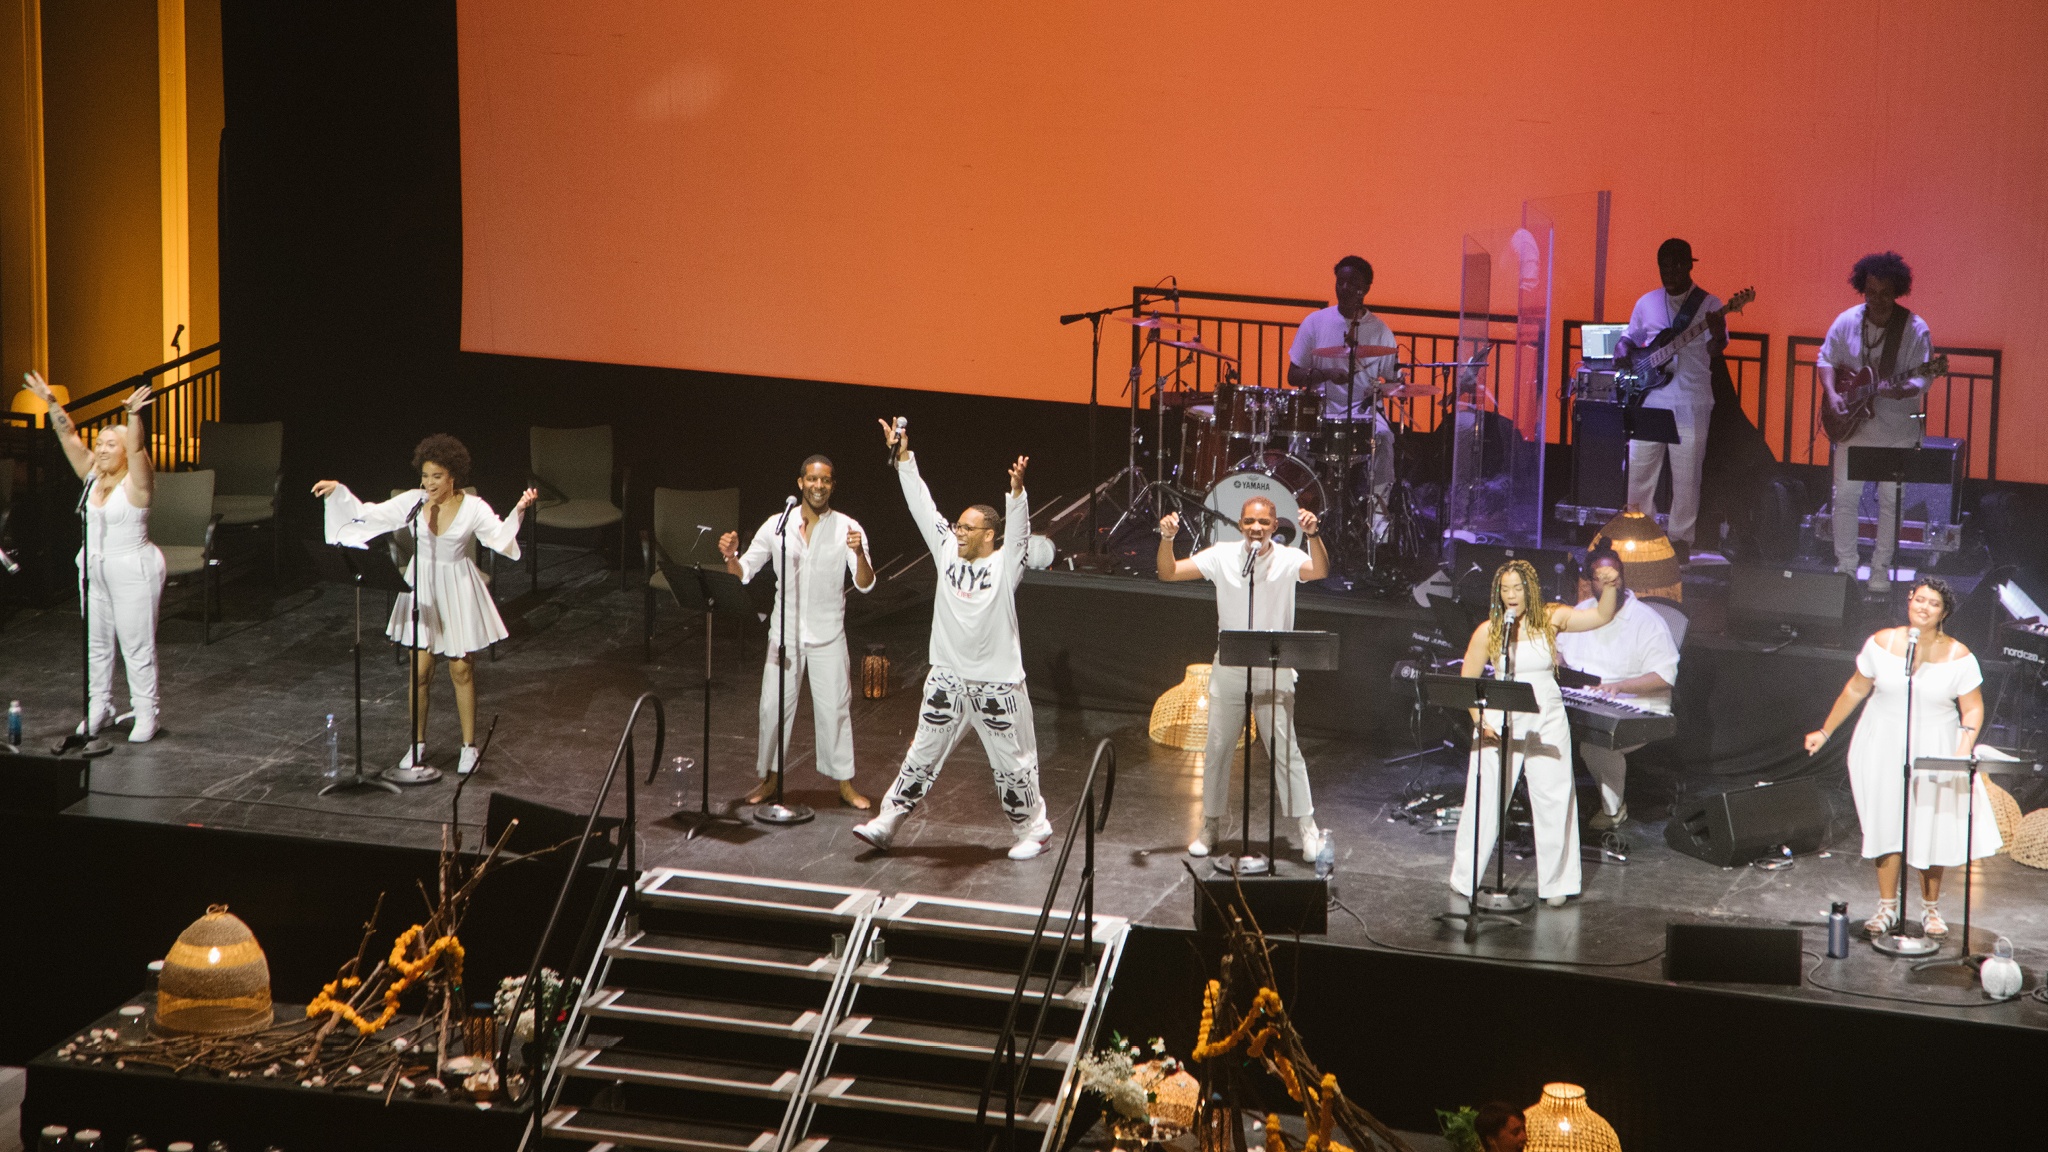 Seven singers performing in a line along the edge of a stage. They all wear white and four backup musicians sit and stand behind them with their instruments.